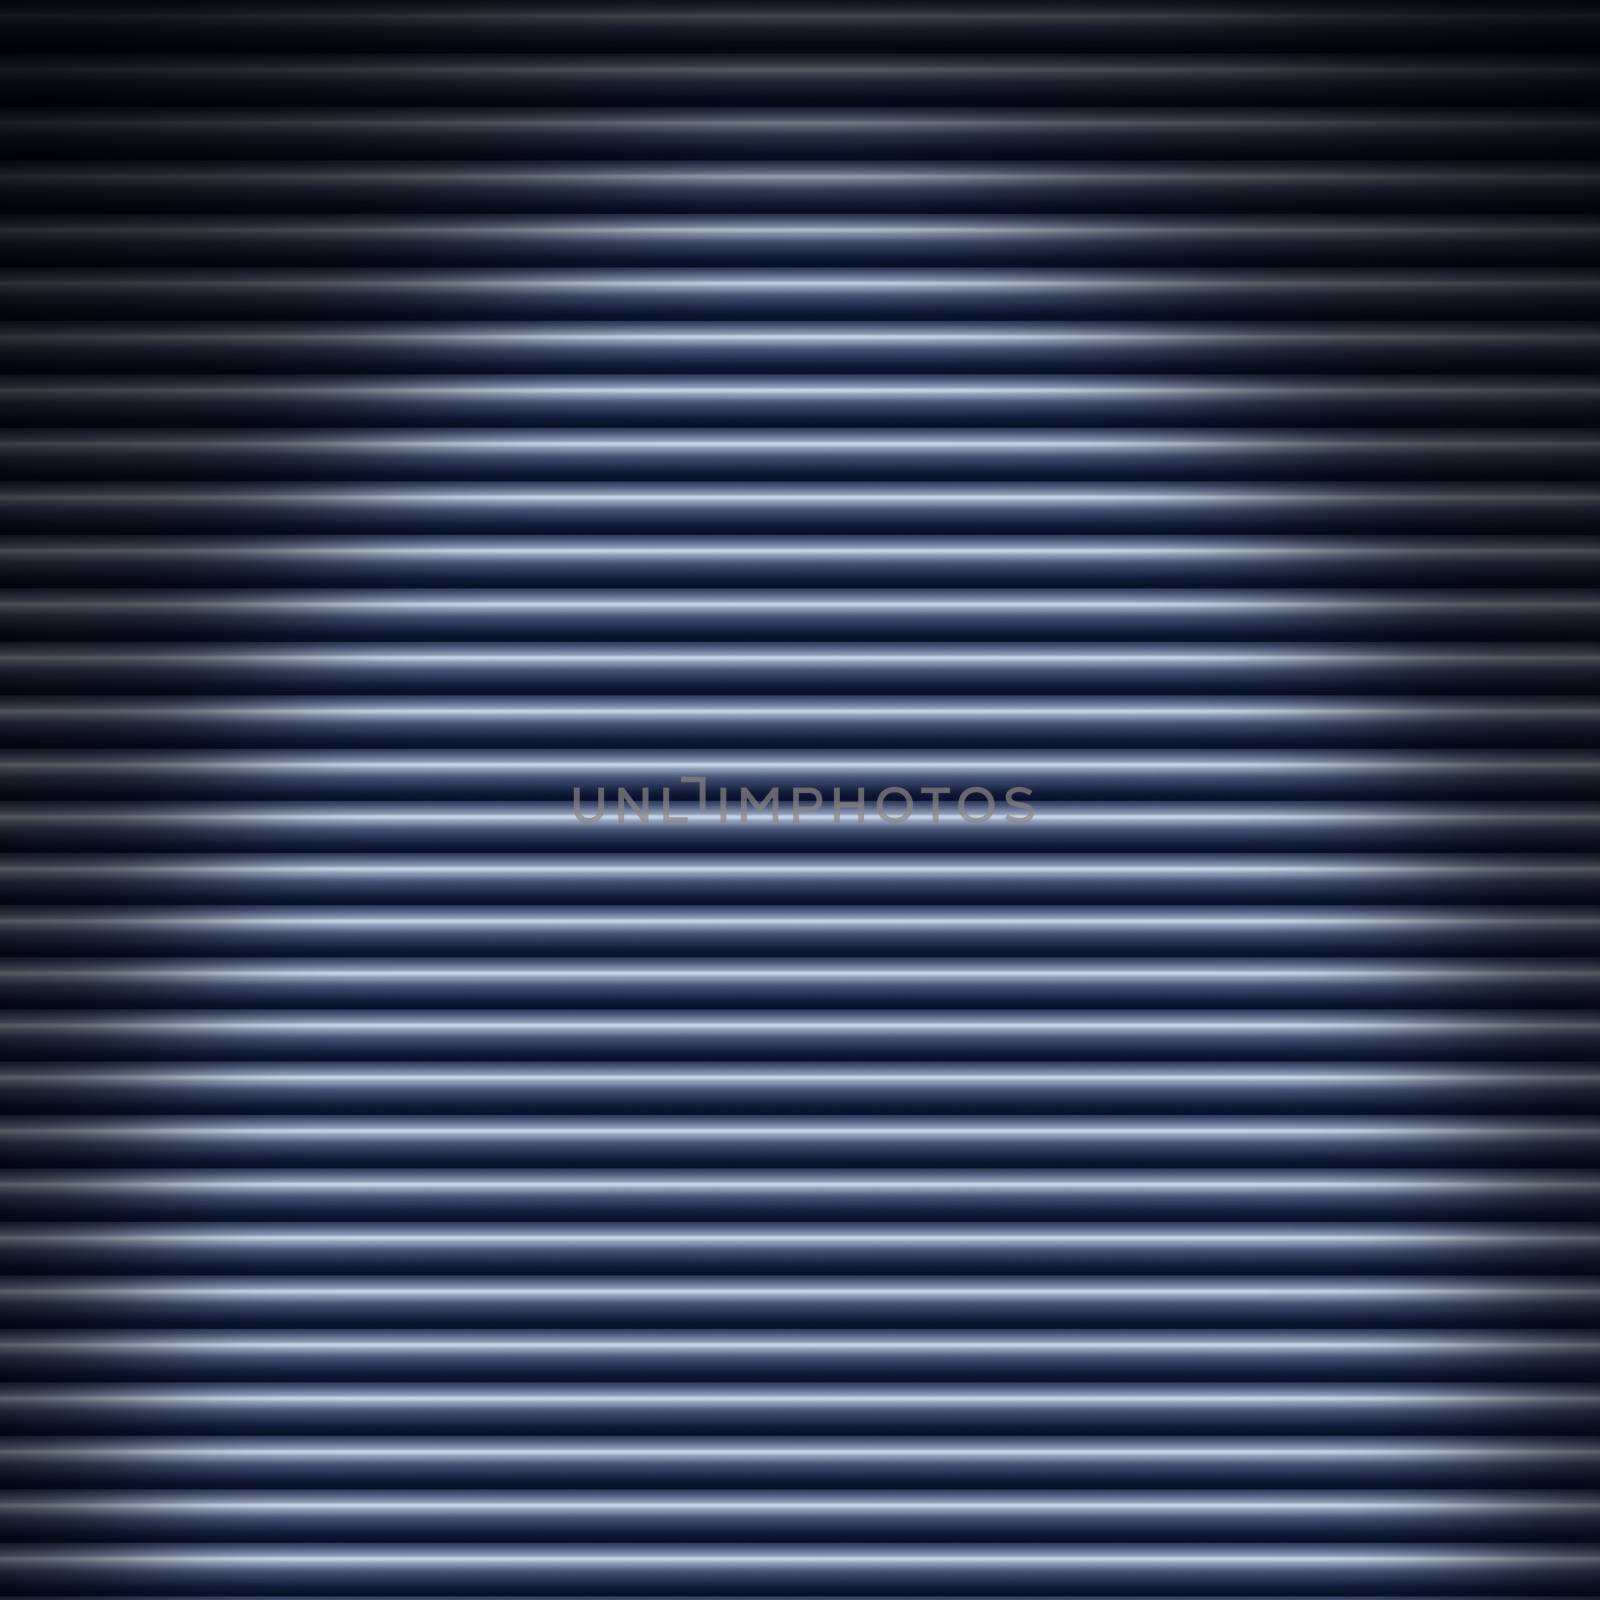 Horizontal blue metallic tube background, lit from above. Dimensions can be distorted.